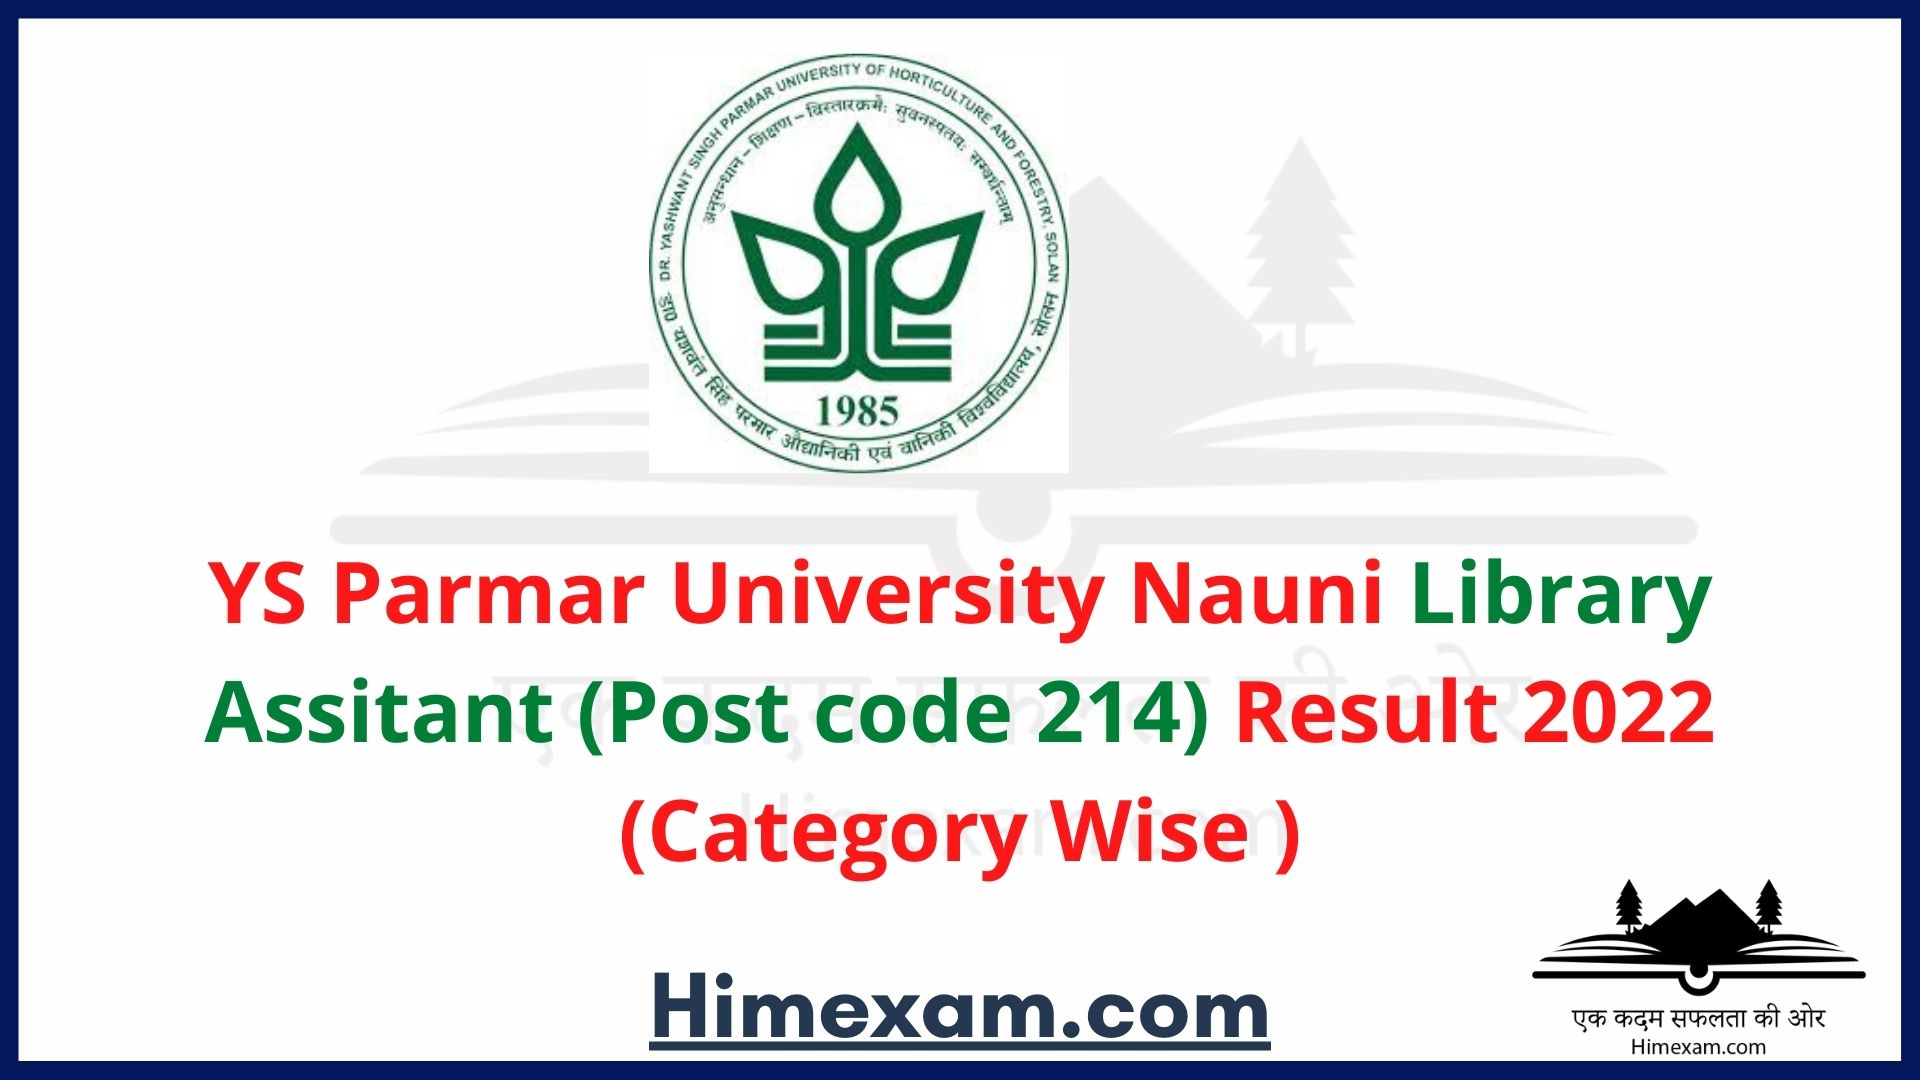 YS Parmar University Nauni Library Assitant (Post code 214) Result 2022 (Category Wise )